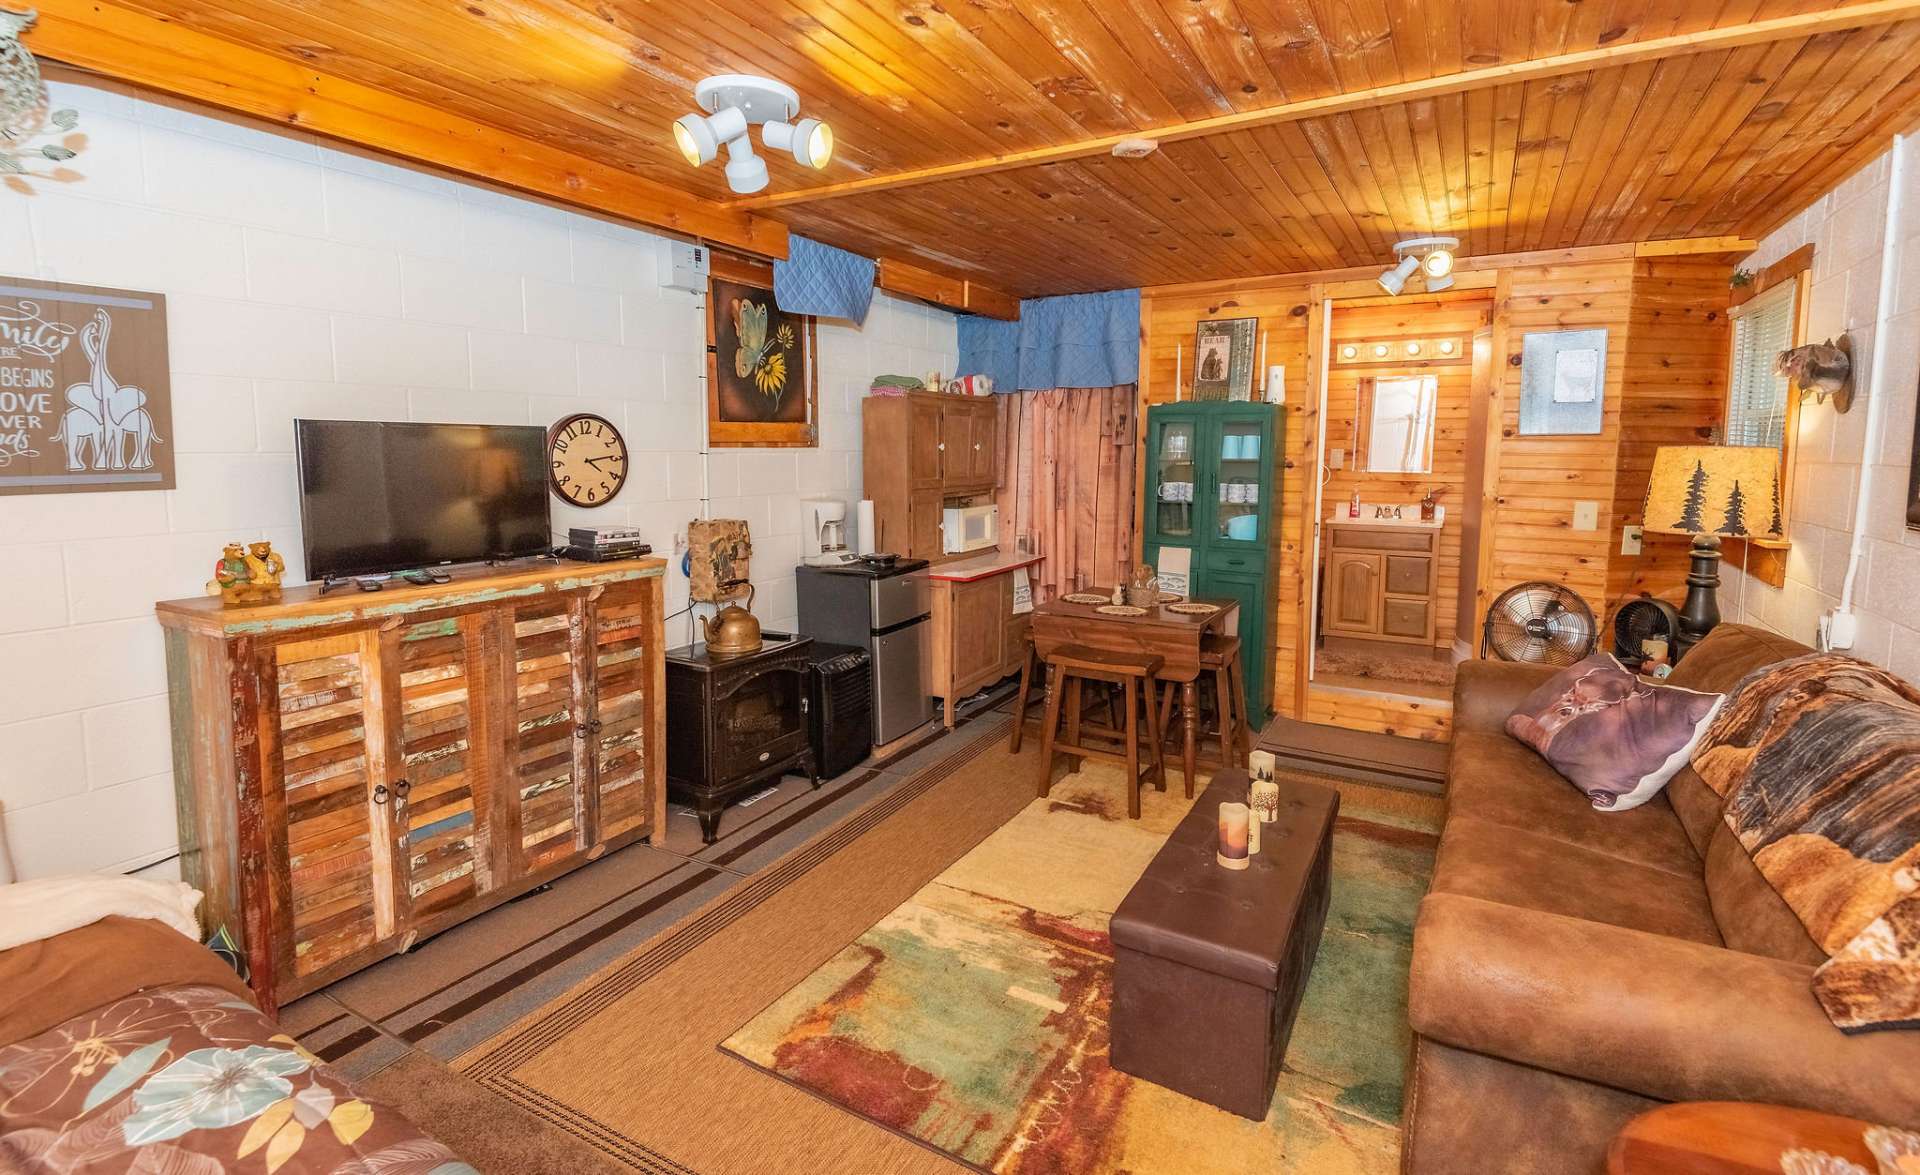 The lower level has a large bonus room, great for another sleeping or entertainment area